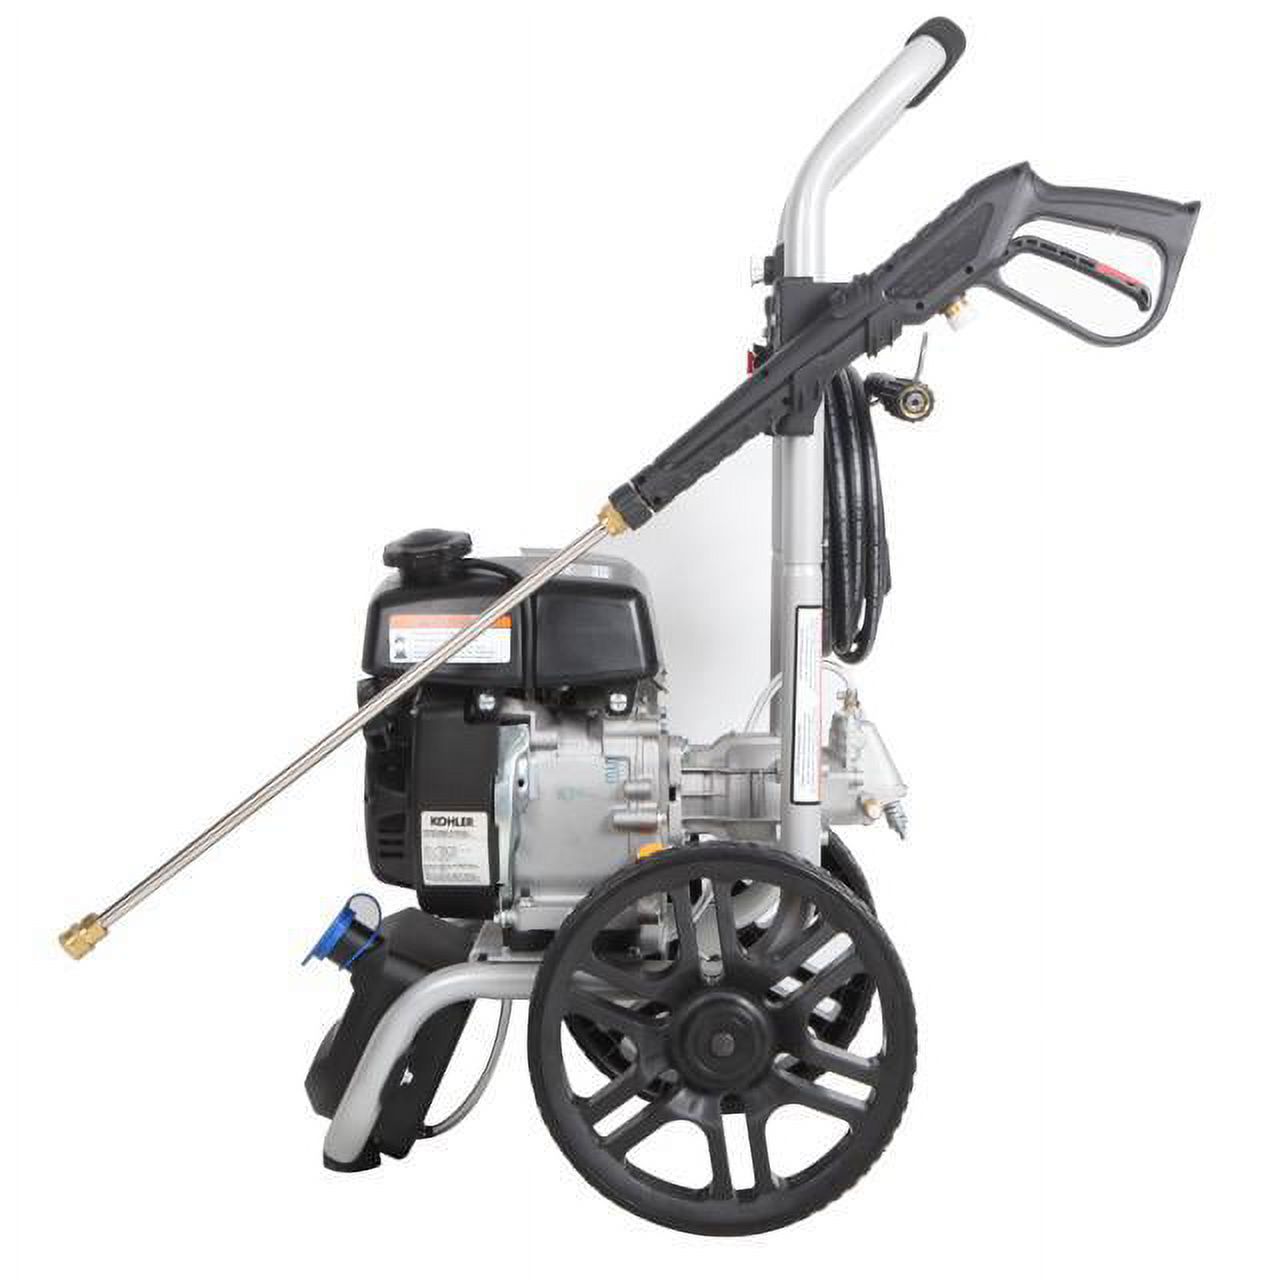 A-IPOWER Power Pressure Washer 3200 PSI Pressure Washer Kohler Engine 2.4 GPM APW3200KH - image 4 of 5